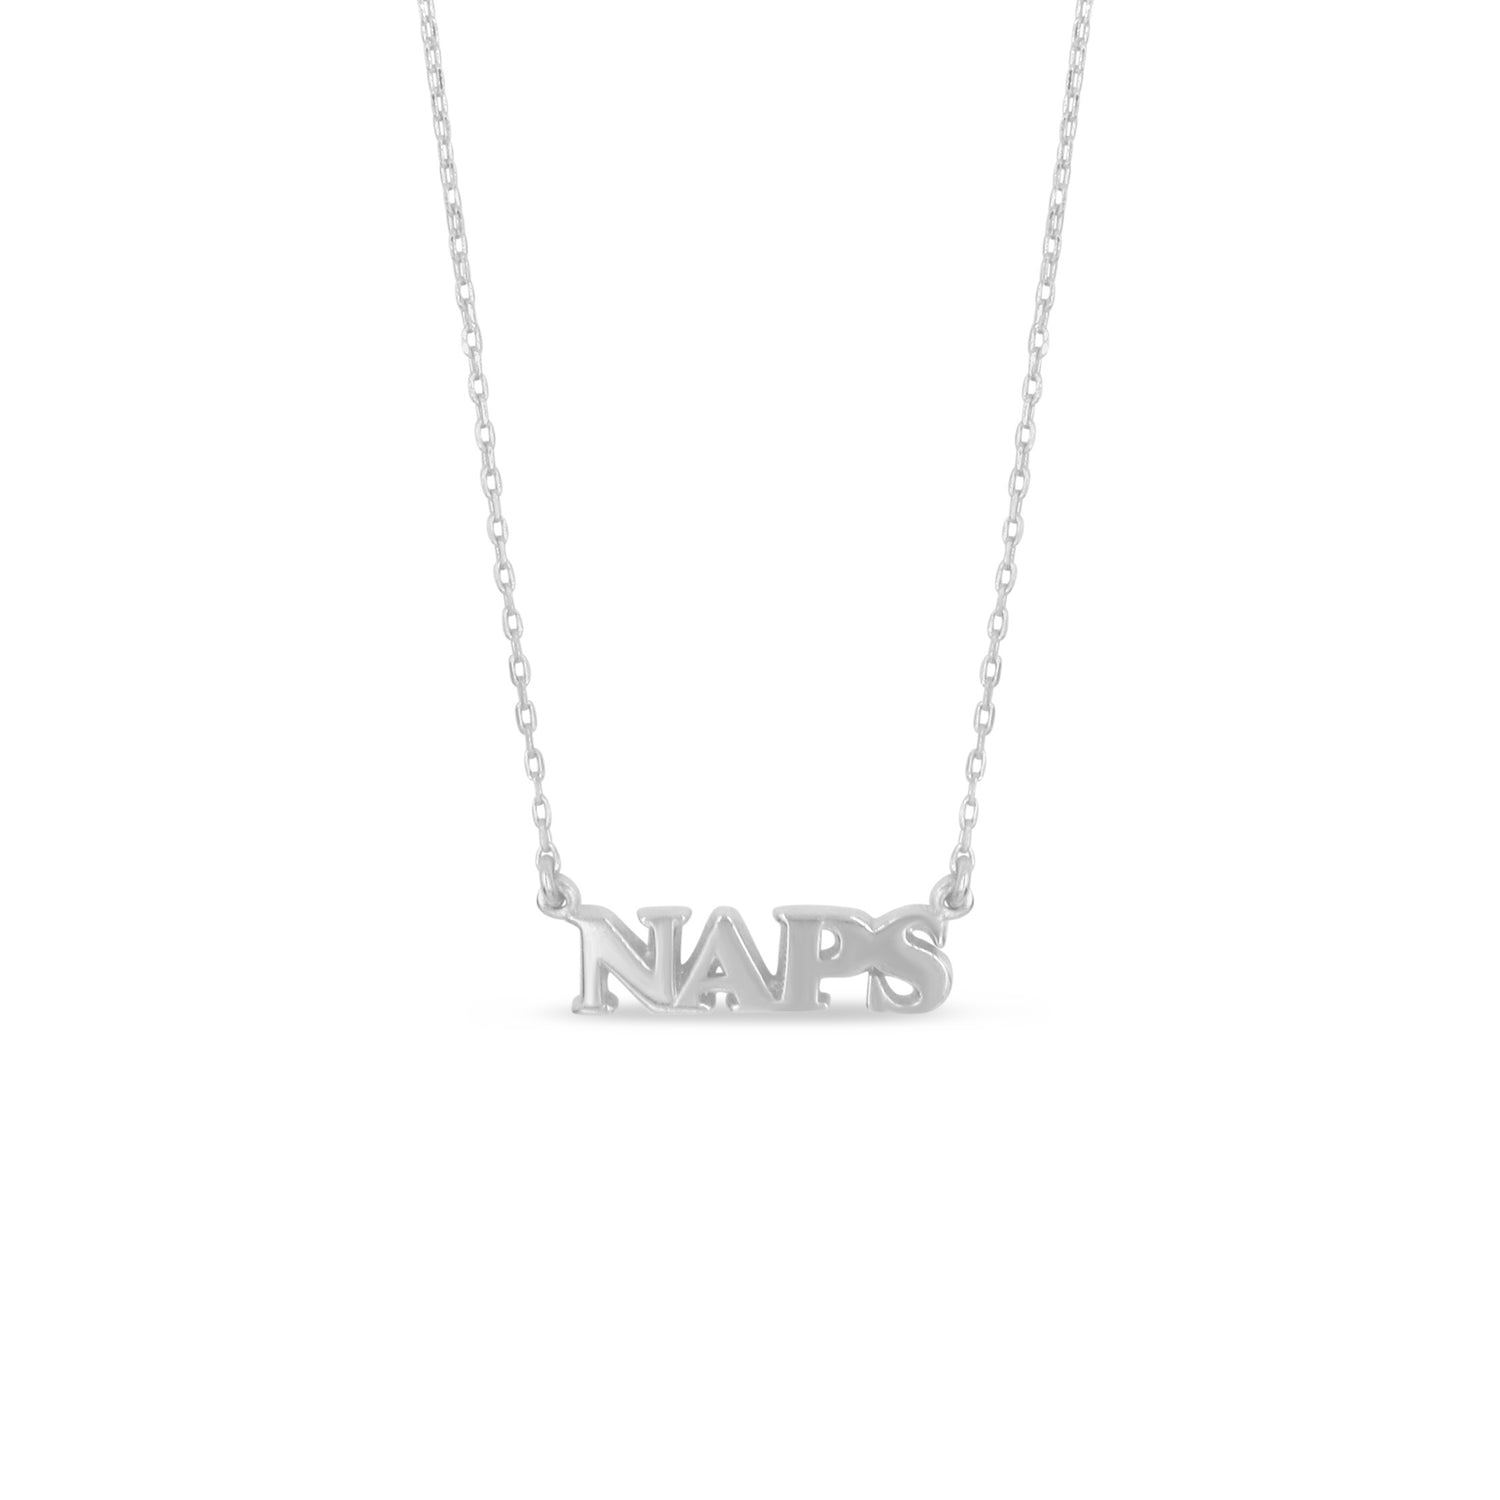 Naps Necklace - Bing Bang Jewelry NYC